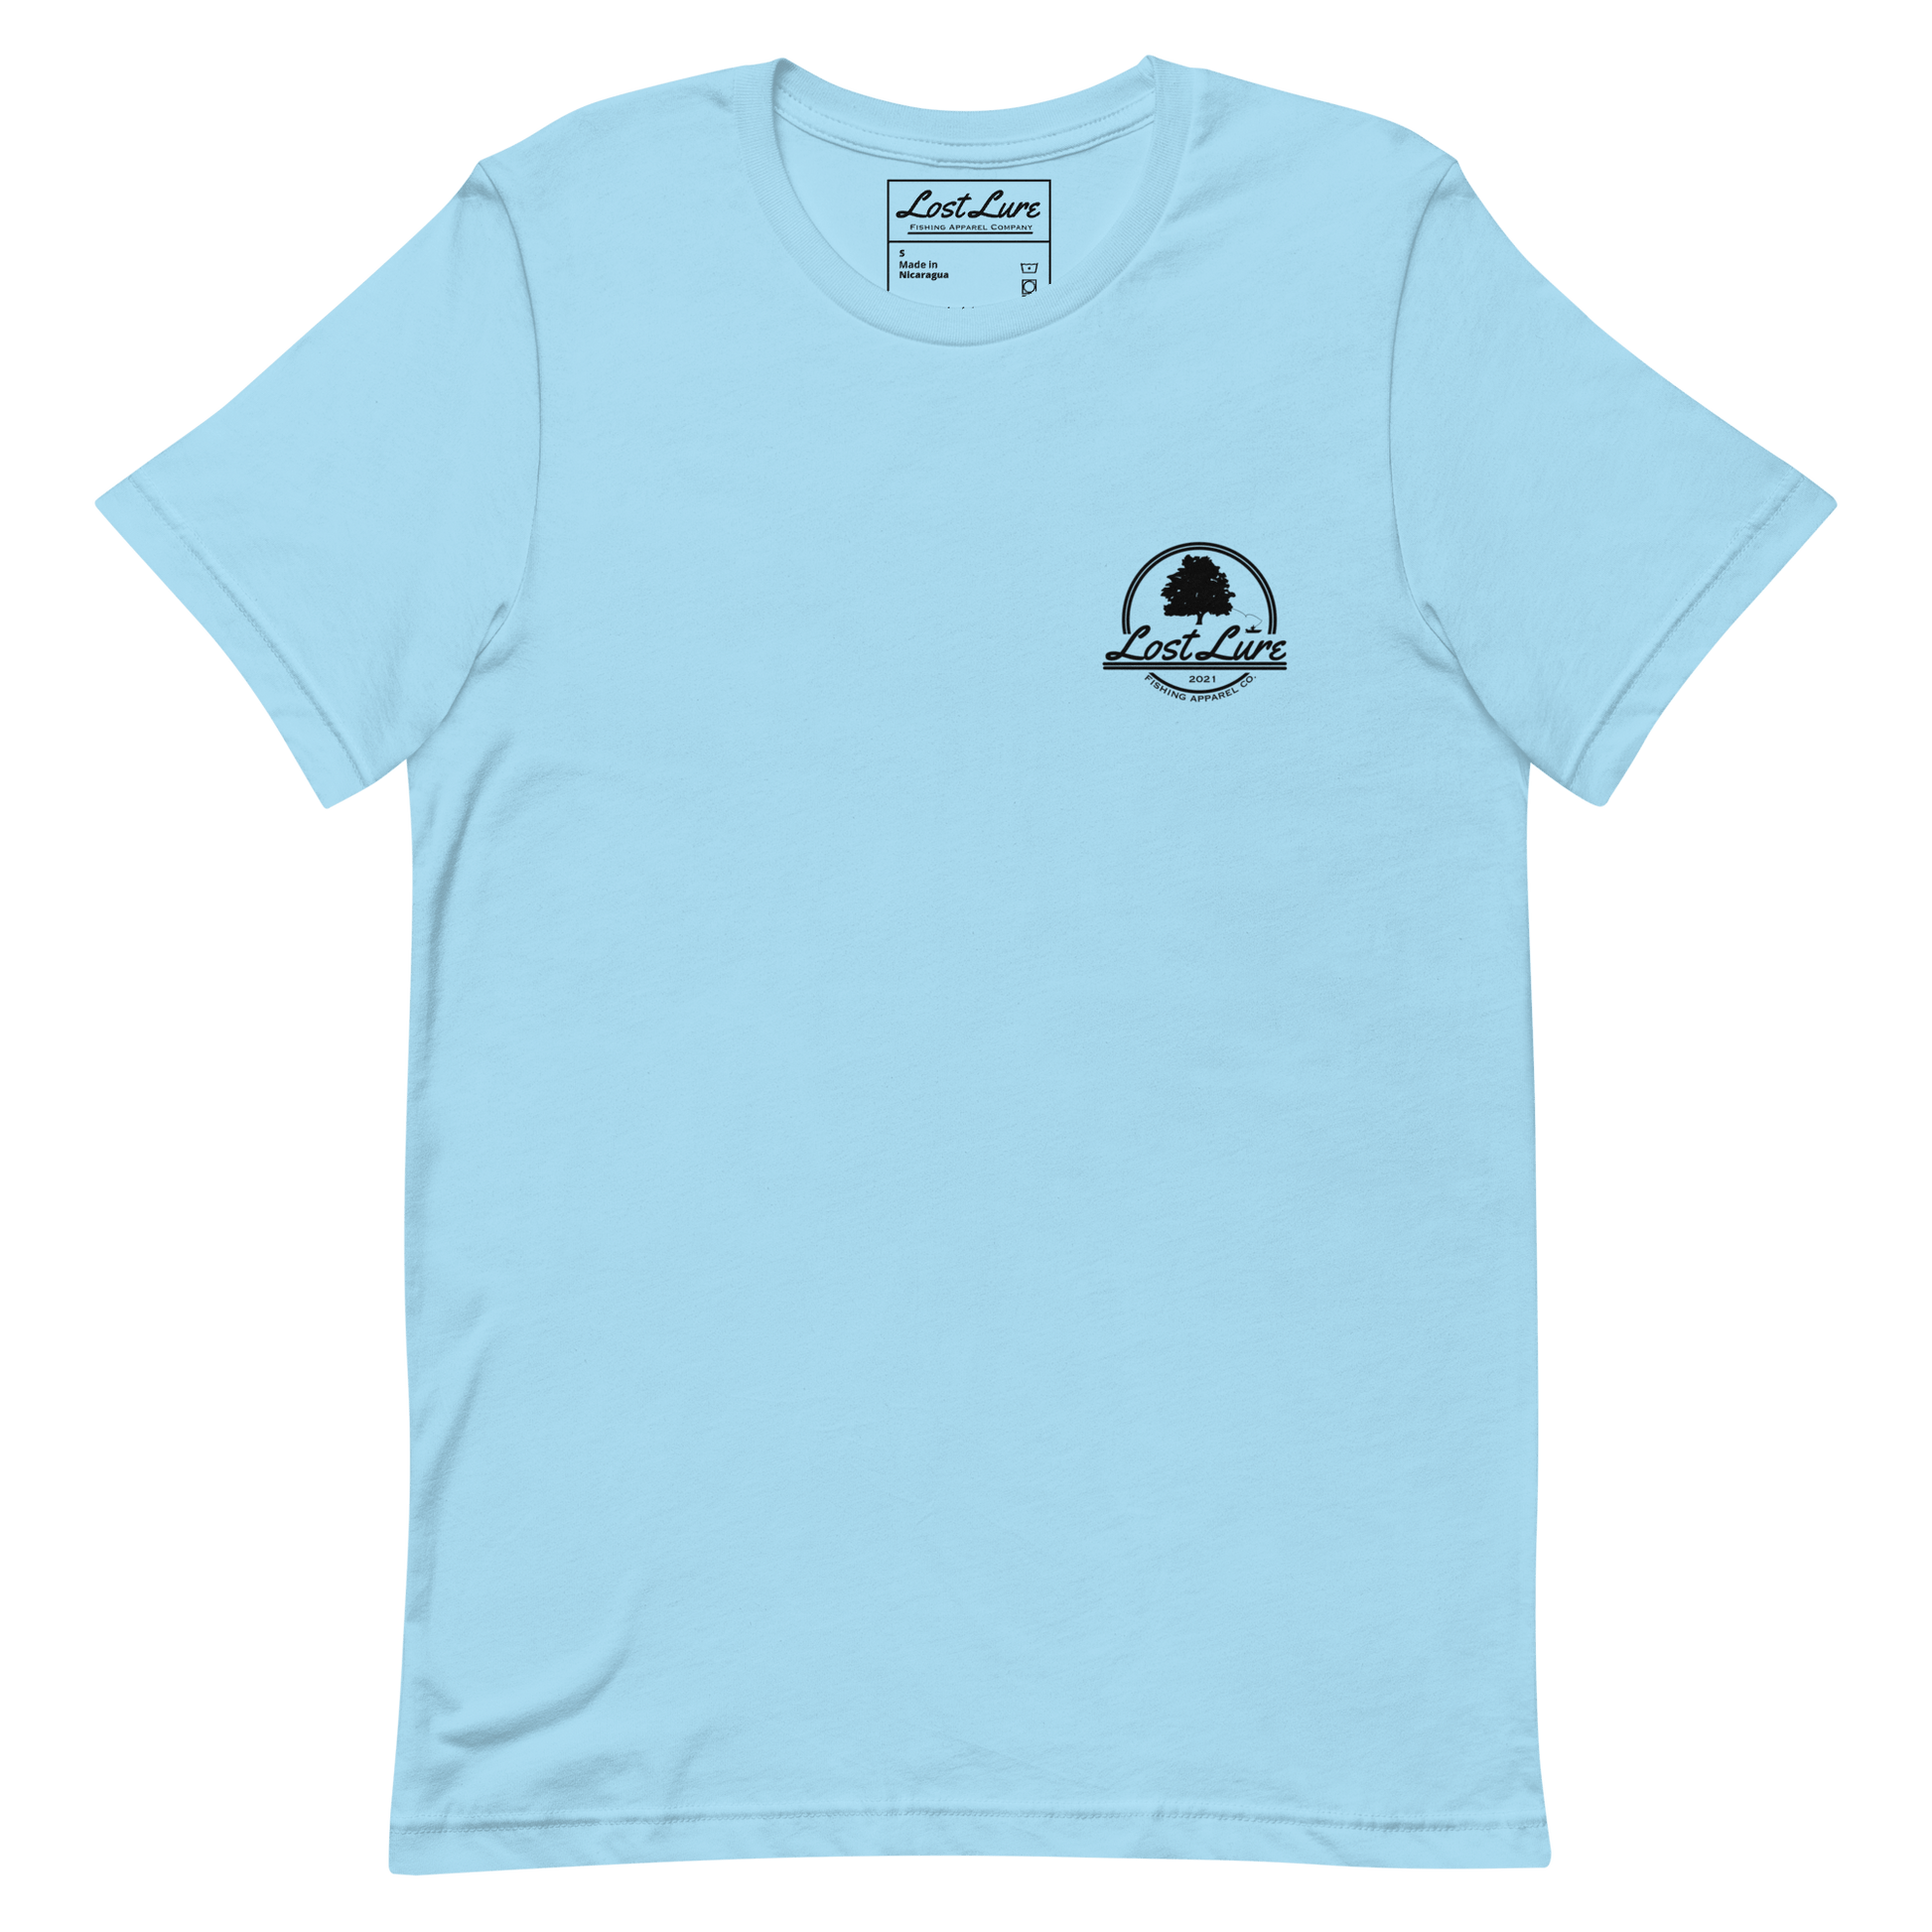 Bass fishing shirt. It has a drawing of a fat bass and it reads “lost lure co, catch fat fish”. The bass design is on the back, the lost lure logo is on the front. Baby blue shirt, front side 